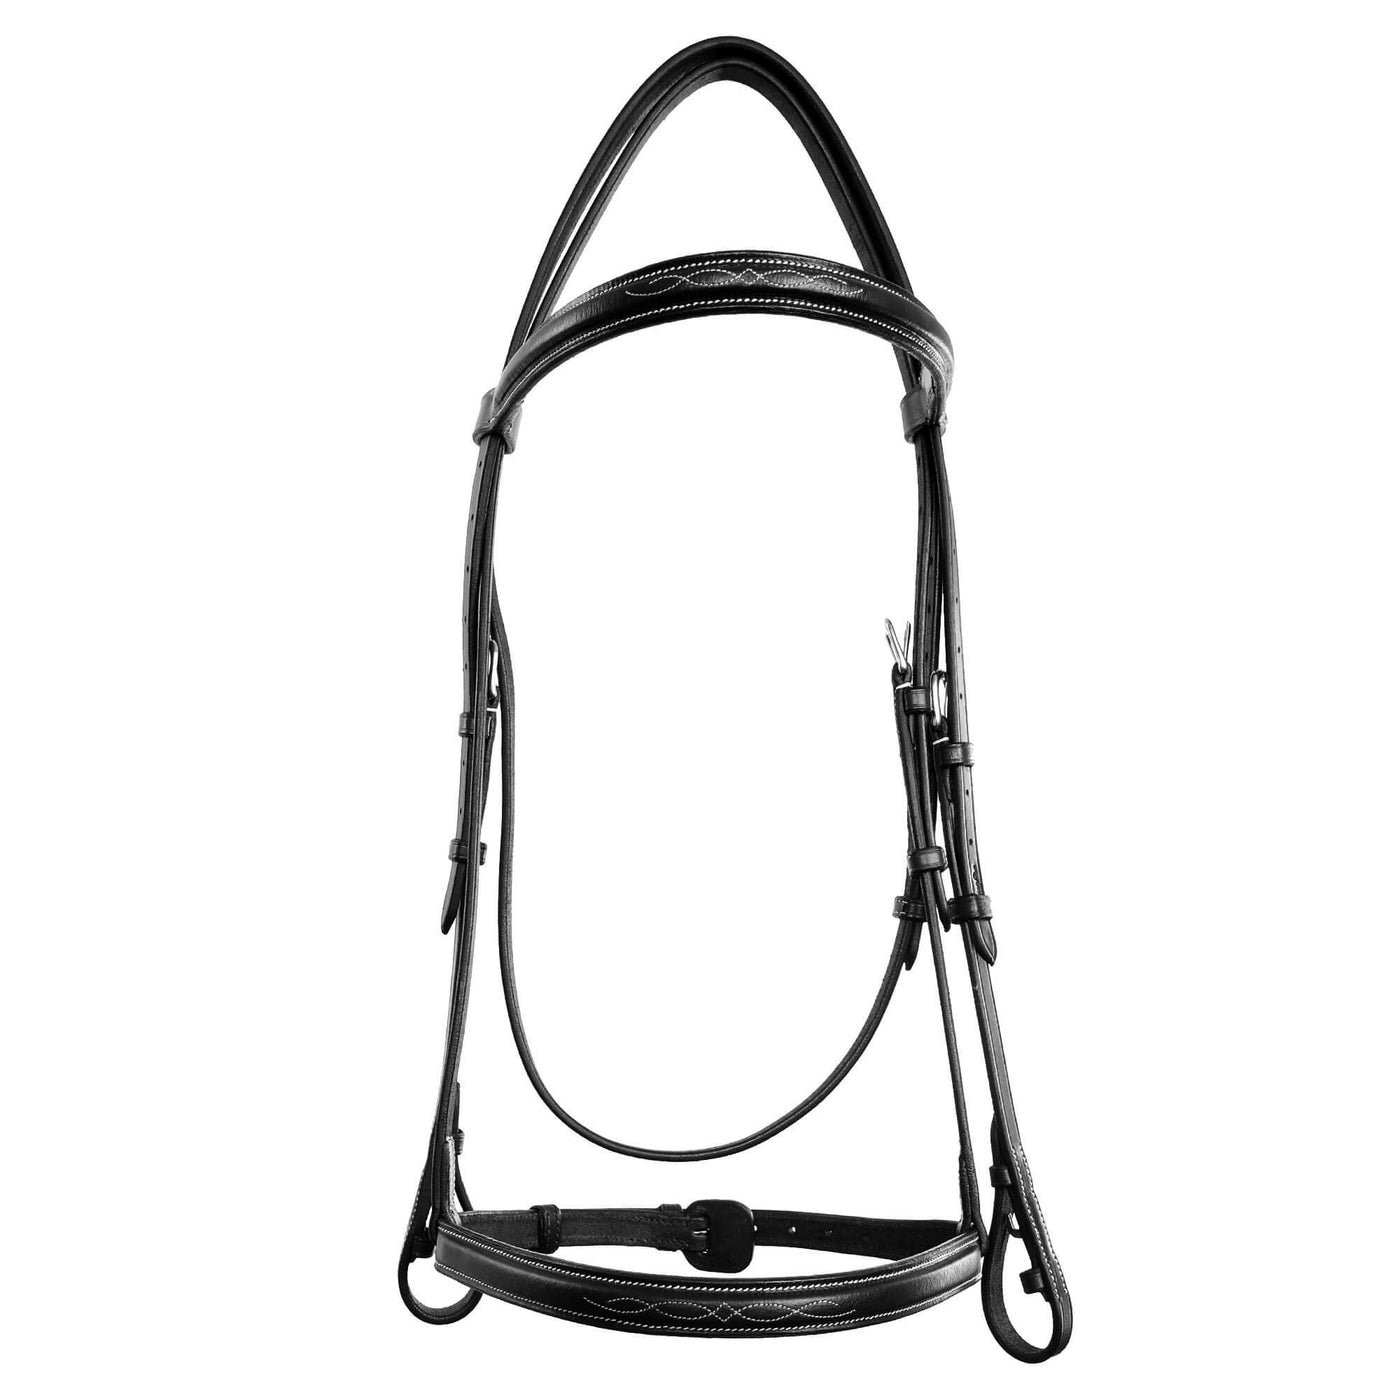 ExionPro Affordable Traditional Fancy Raised Hunter Bridle With Laced Reins